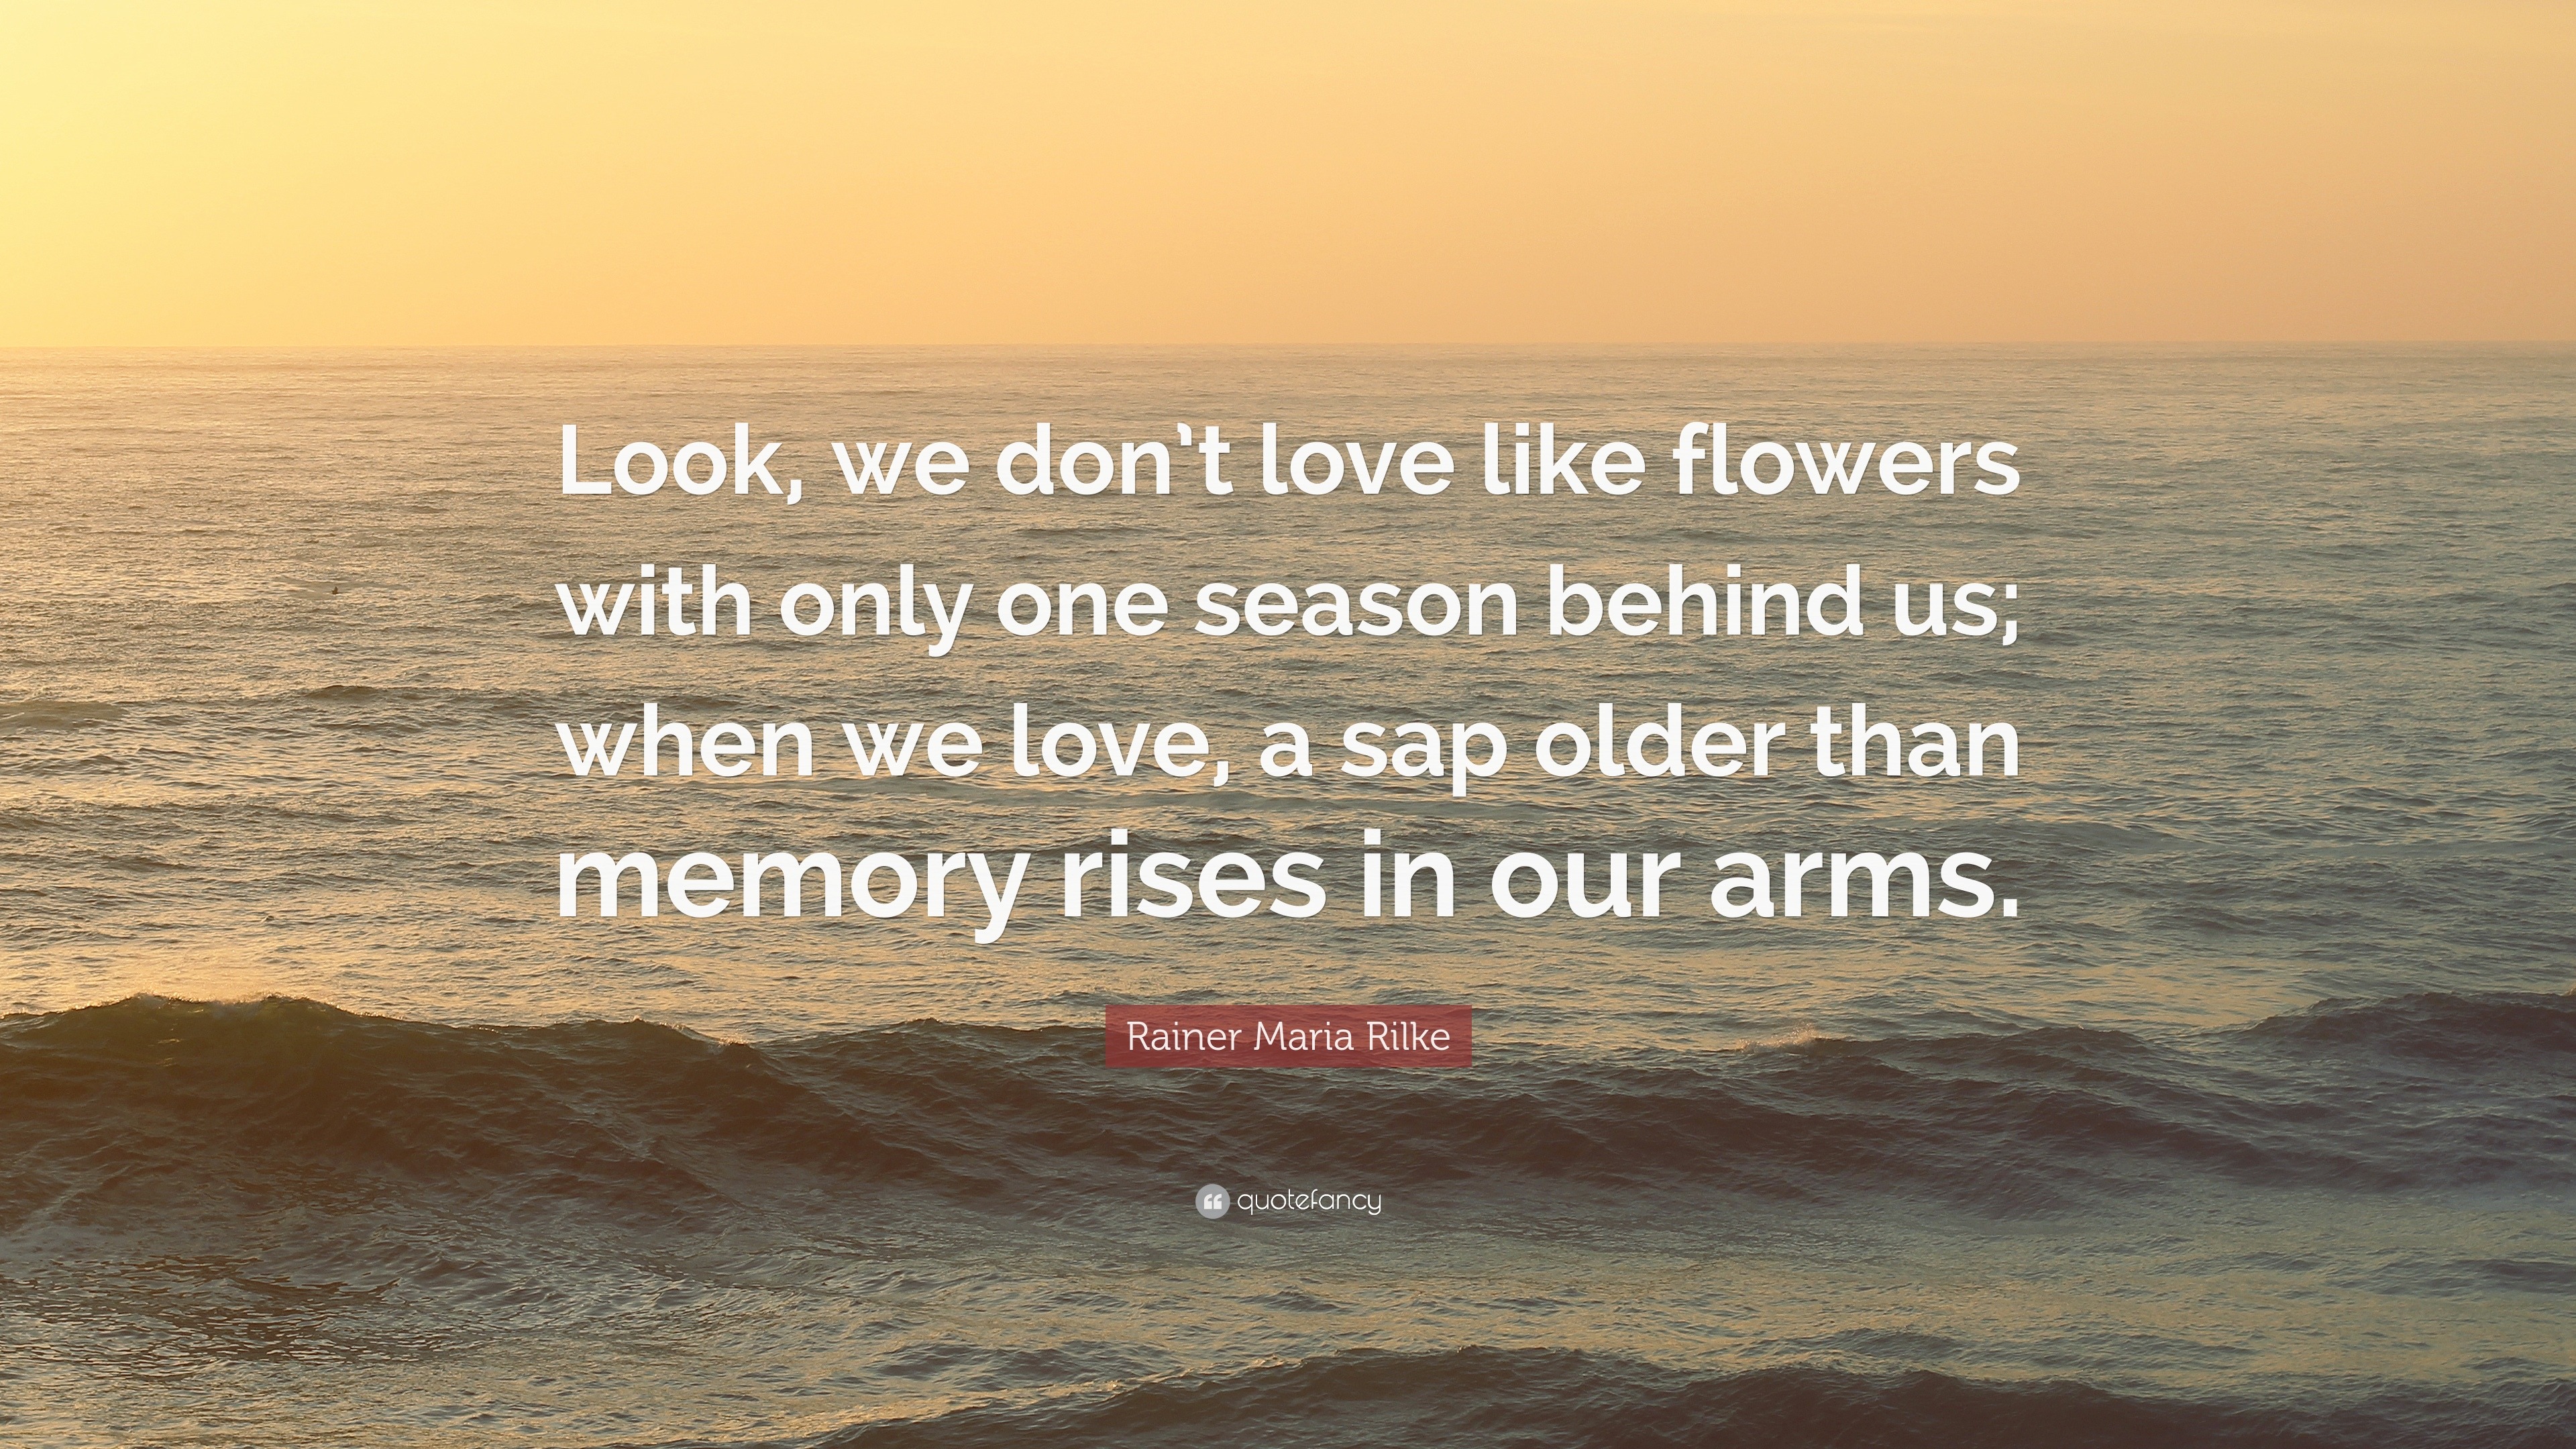 Rainer Maria Rilke Quote “Look we don t love like flowers with